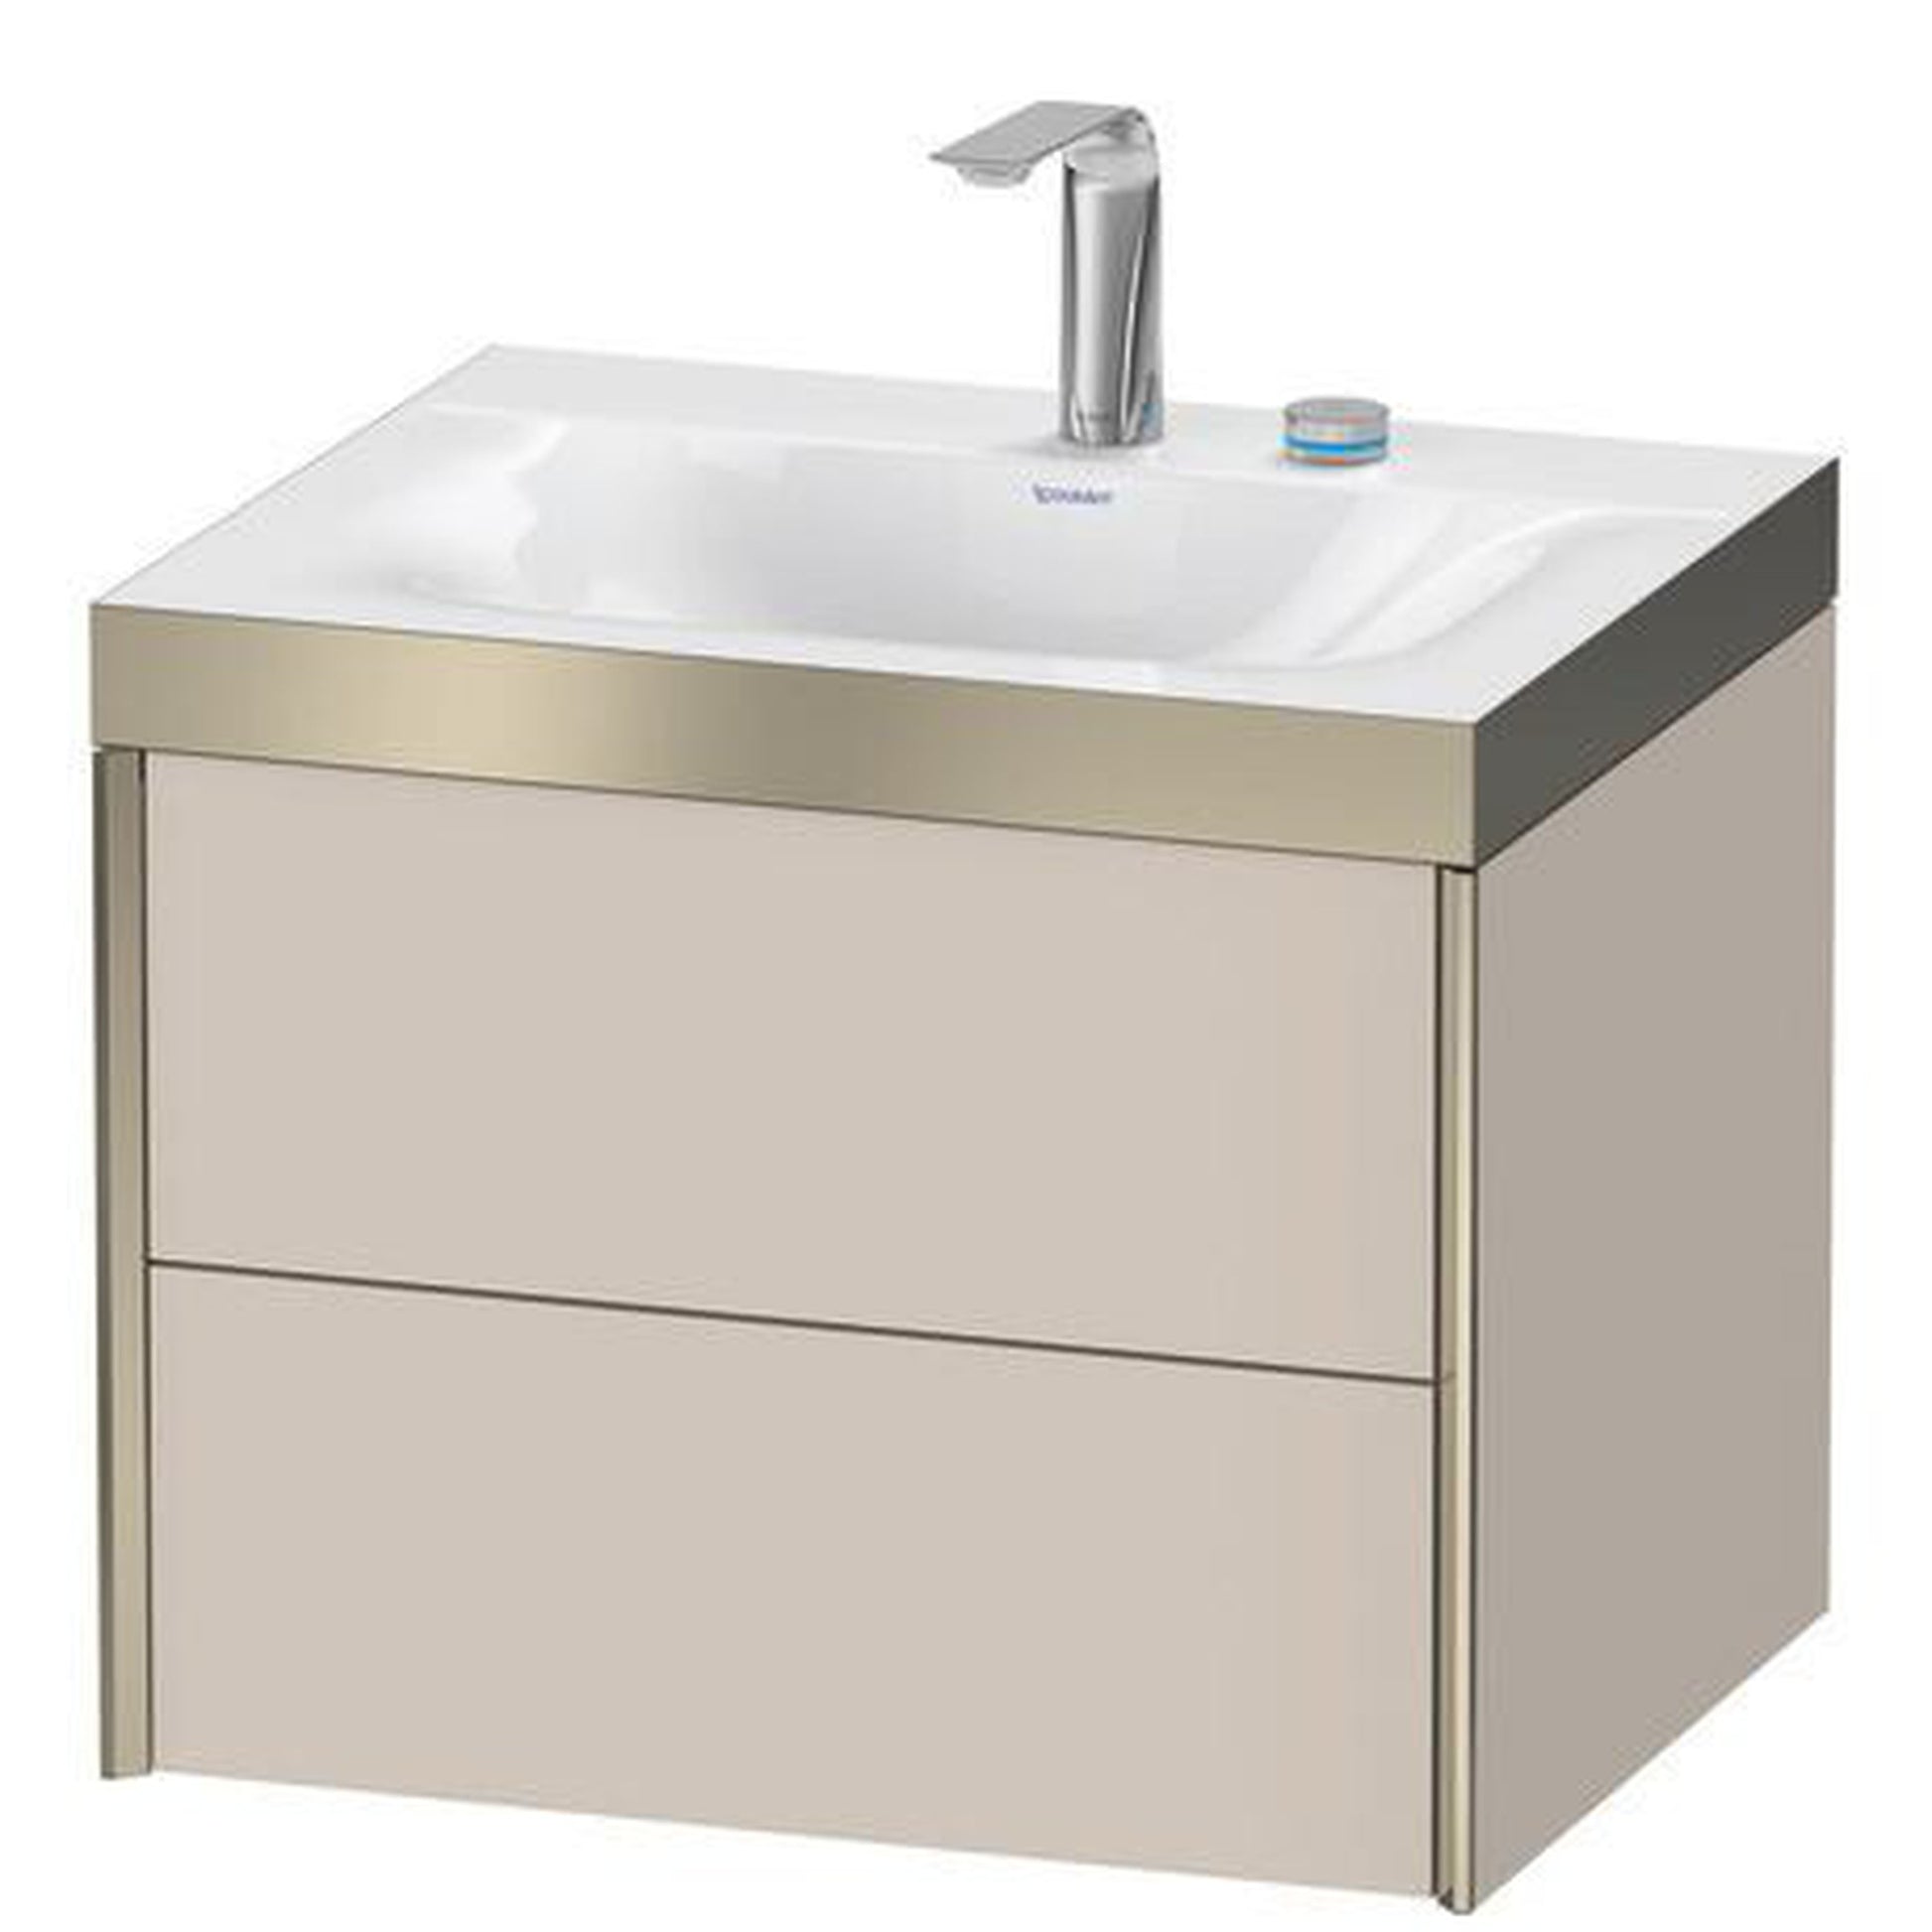 Duravit Xviu 24" x 20" x 19" Two Drawer C-Bonded Wall-Mount Vanity Kit With Two Tap Holes, Taupe (XV4614EB191P)